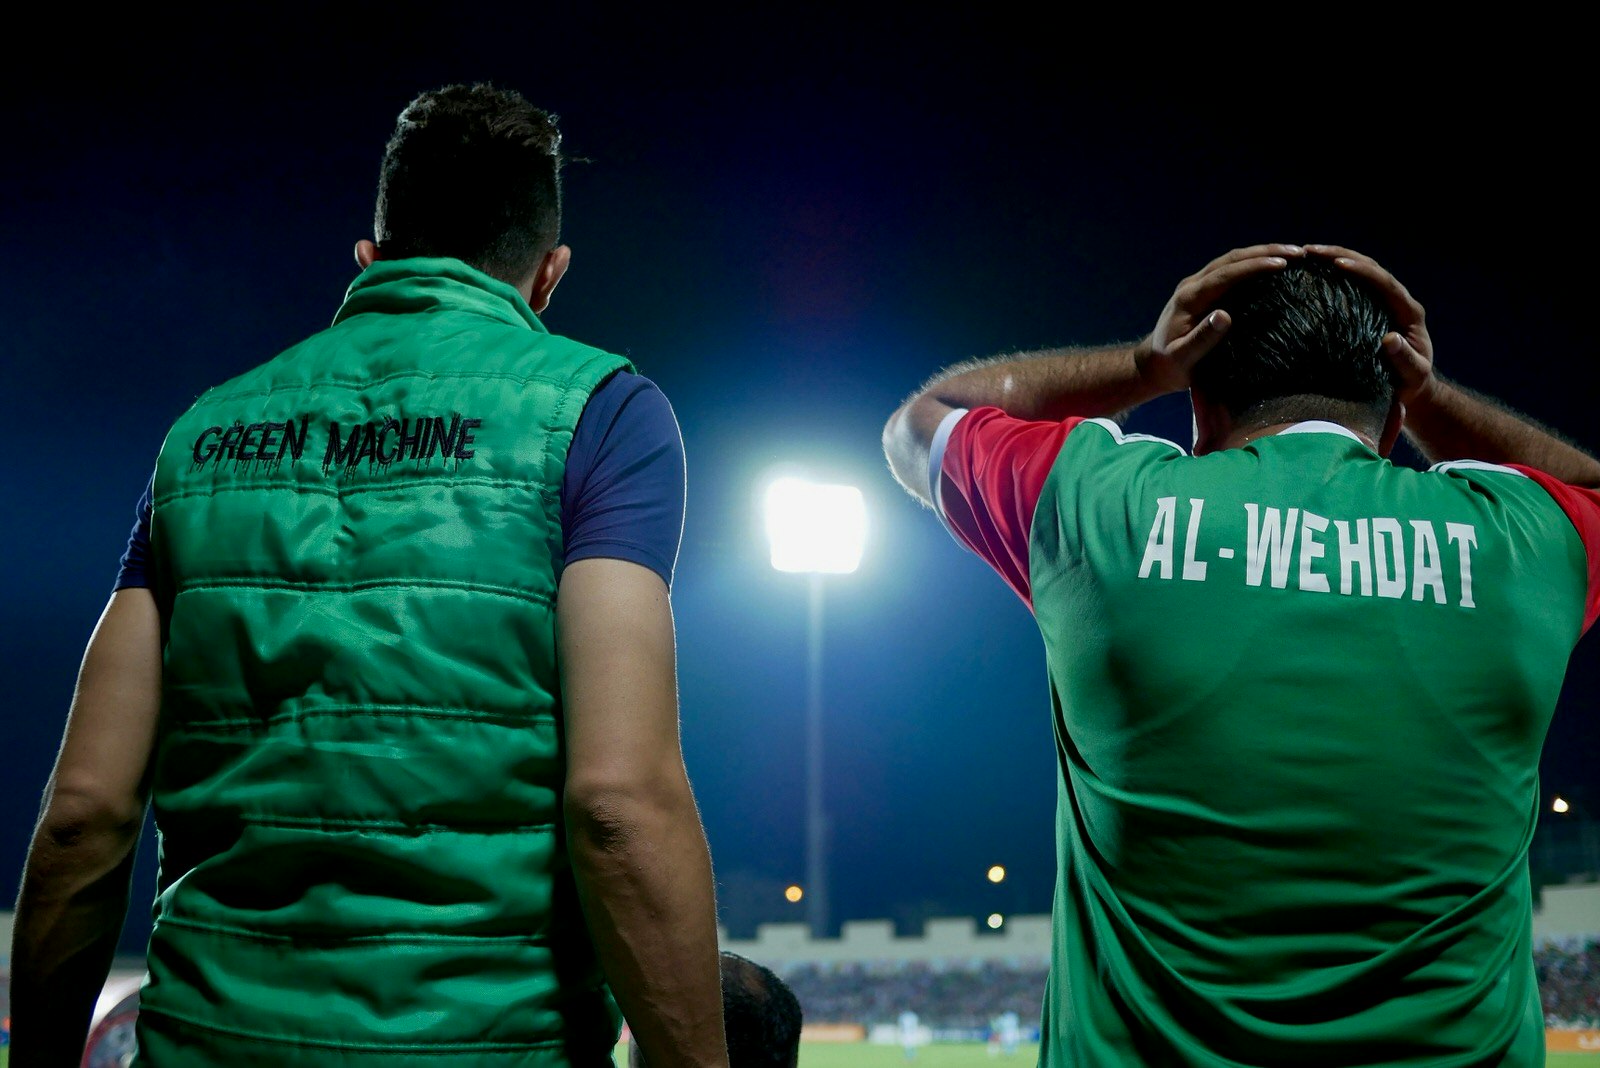 Fans react as Wehdat fails to net a goal during a last-minute chance to clinch the match in the stadium near Amman, Jordan